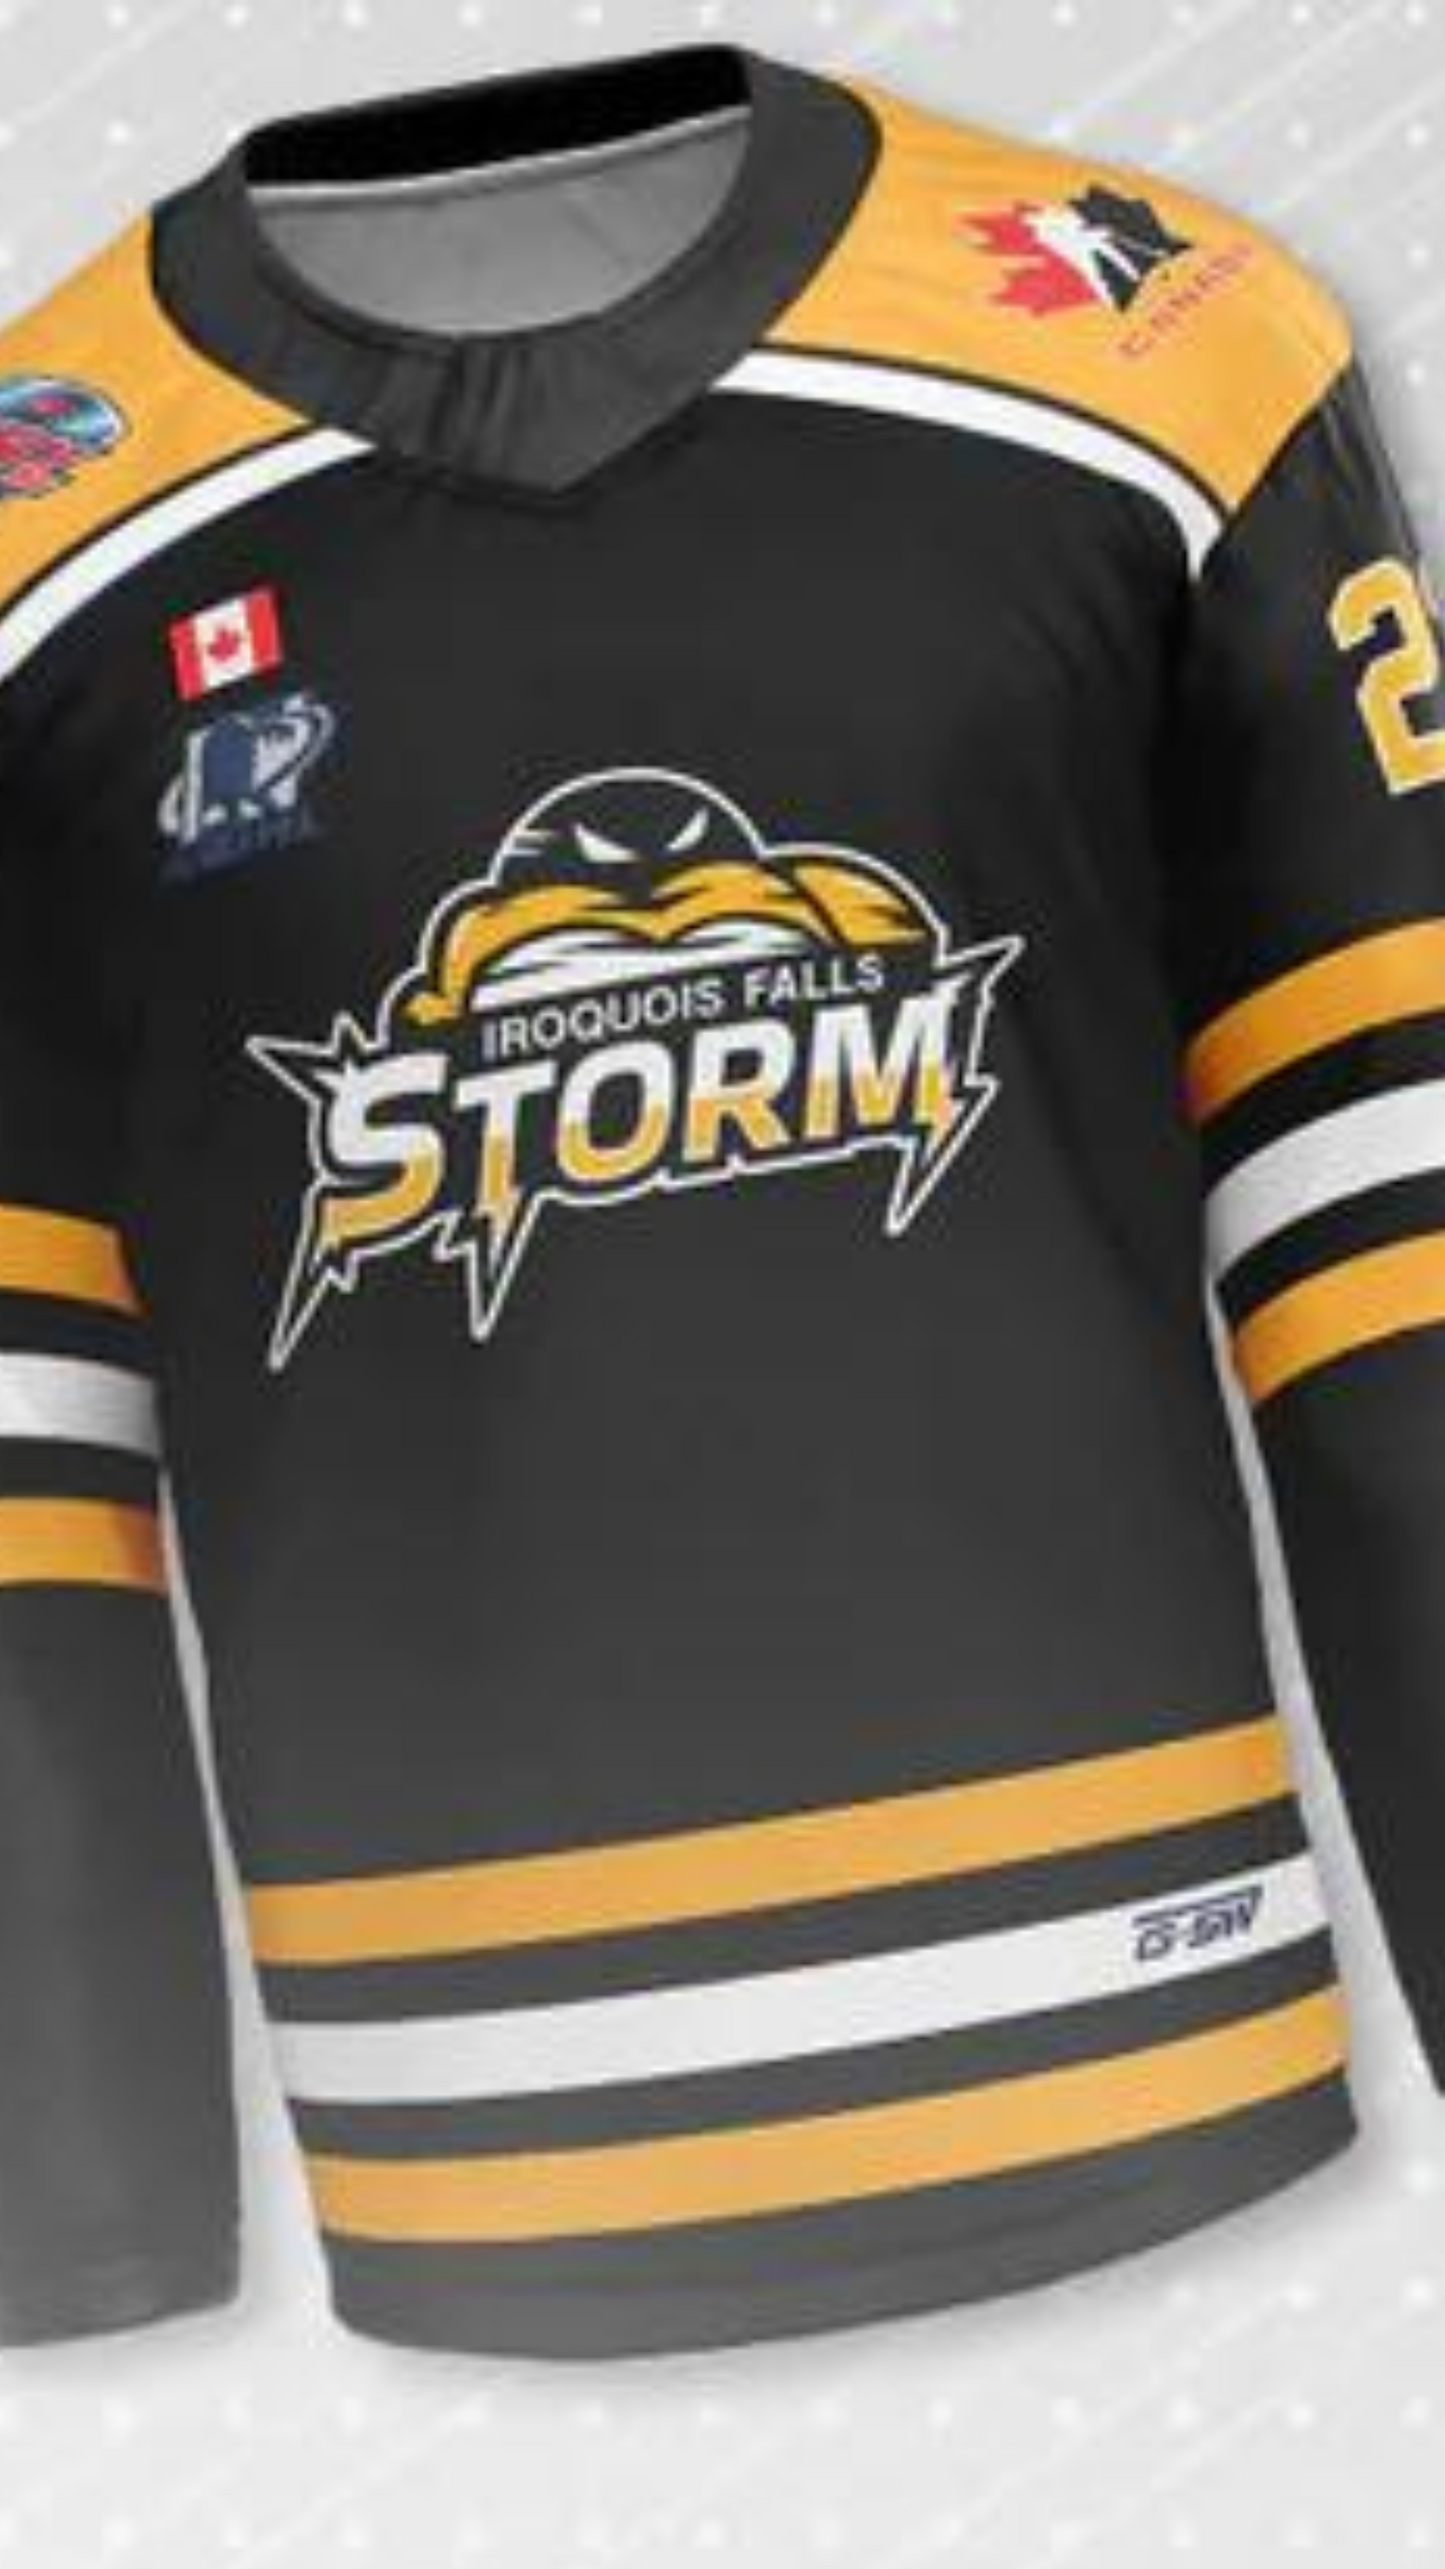 GSW STORM OFFICIAL JERSEY